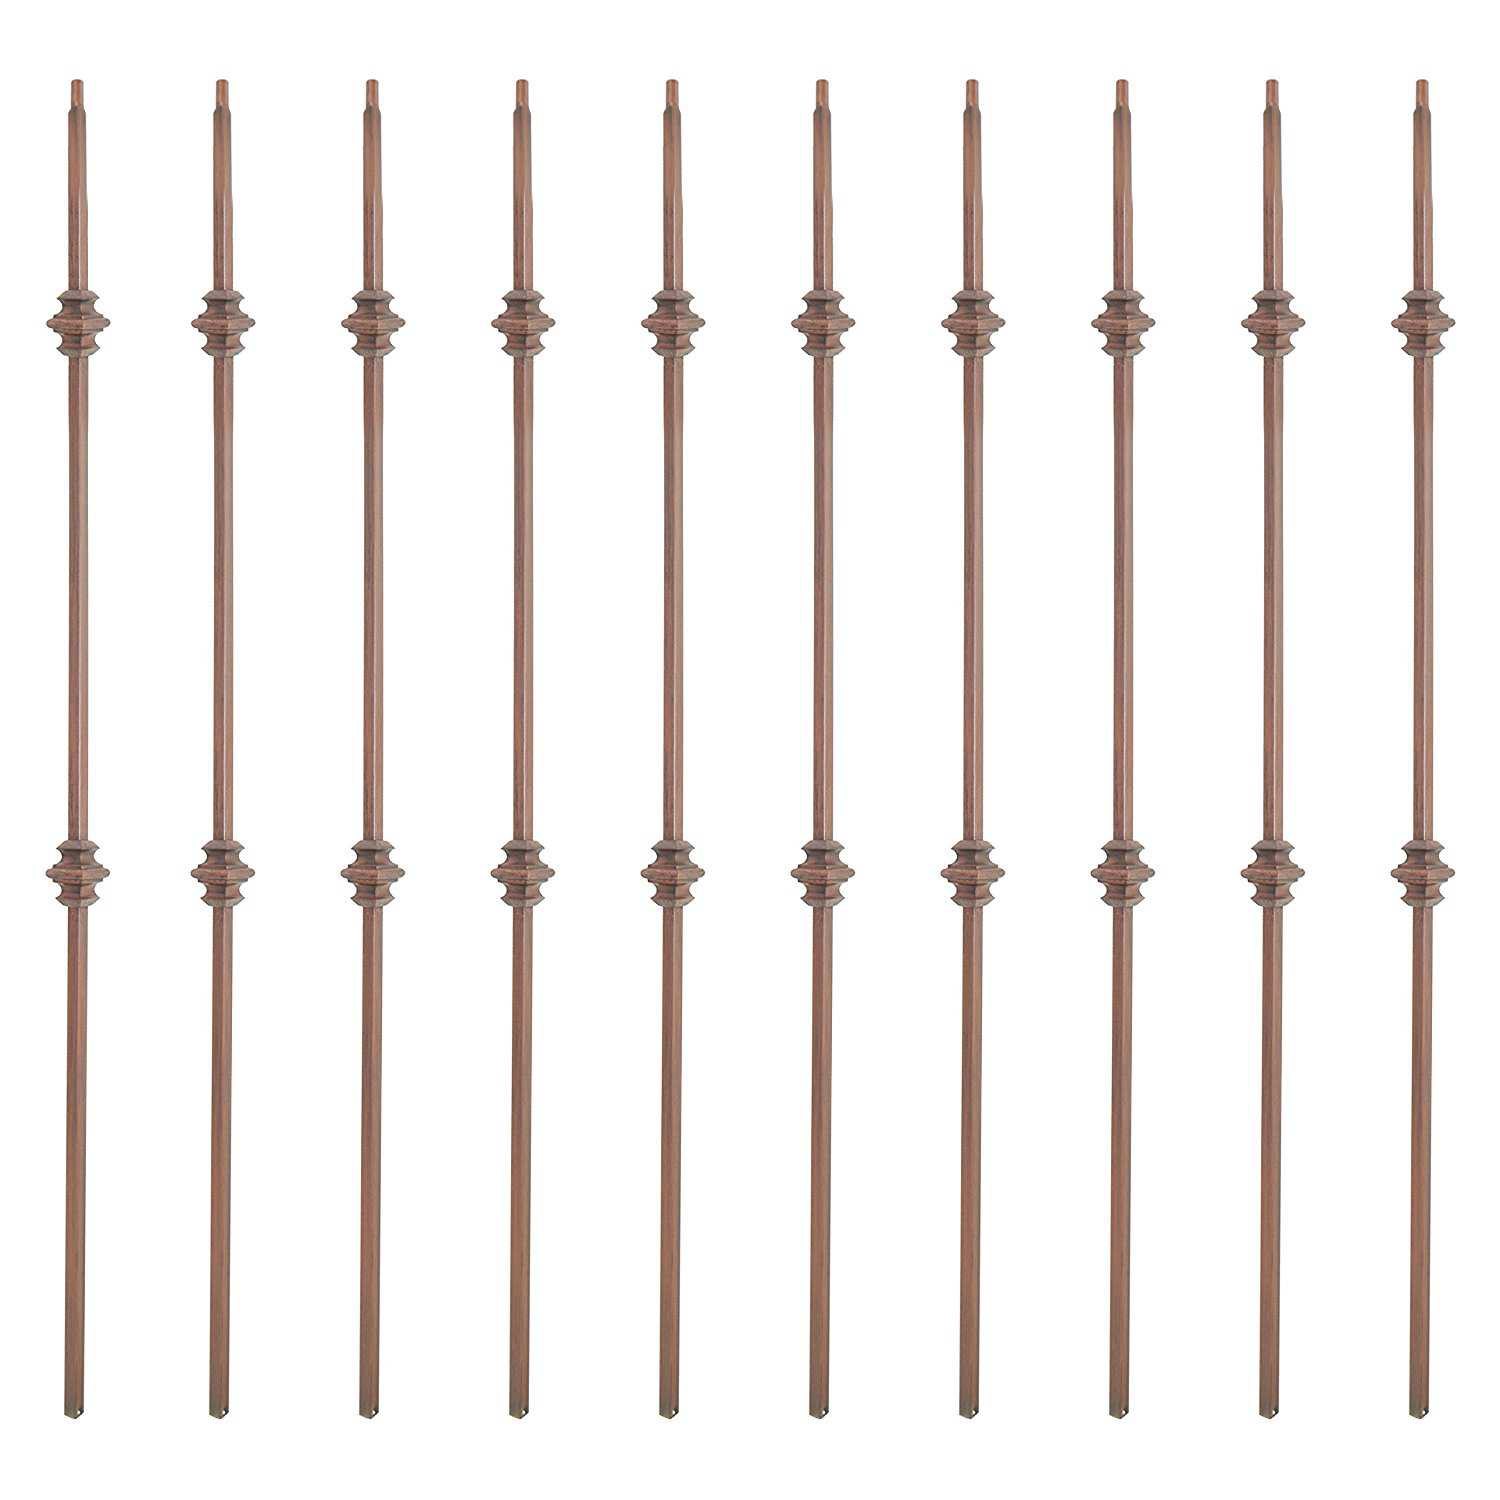 Aleko Oil Rubbed Bronze Baluster - 44-Inch - Double Knuckle Design - Pack of 10